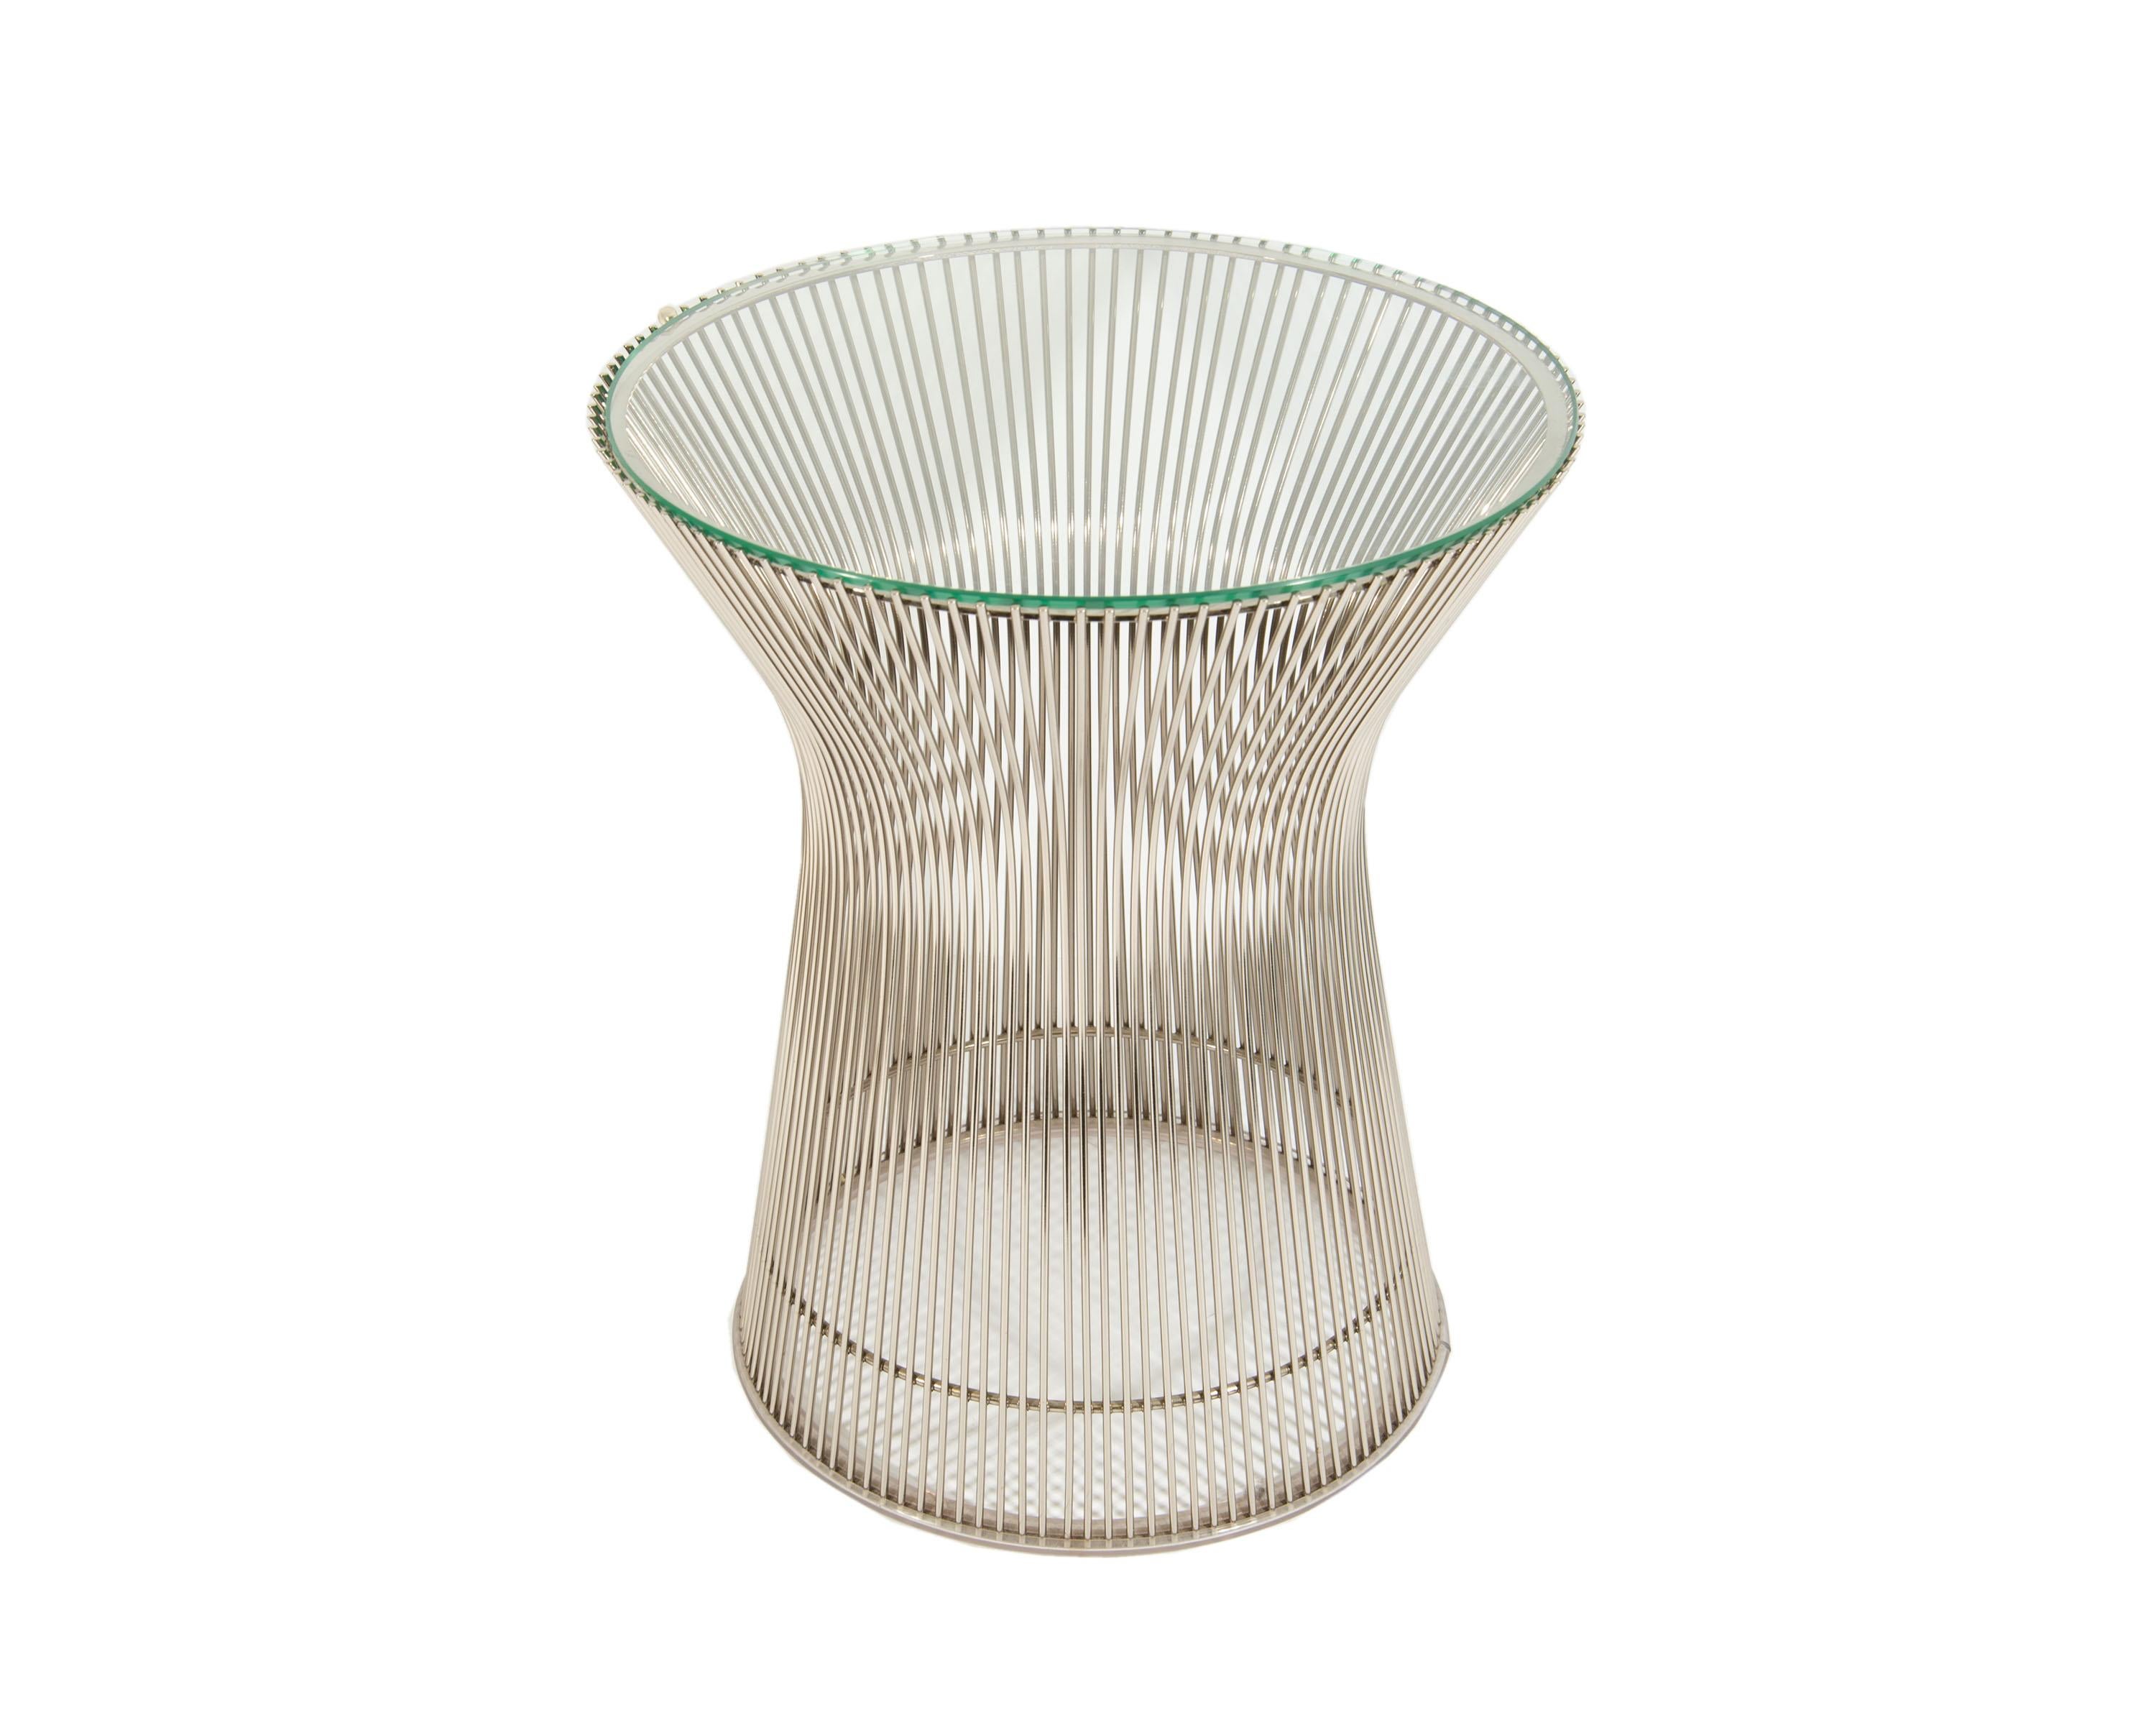 A vintage steel and glass side table designed by American architect and designer Warren Platner (1919-2006) for Knoll. The table design originated in 1966 and features multiple welded curved steel rods attached in a vertical pattern to a circular